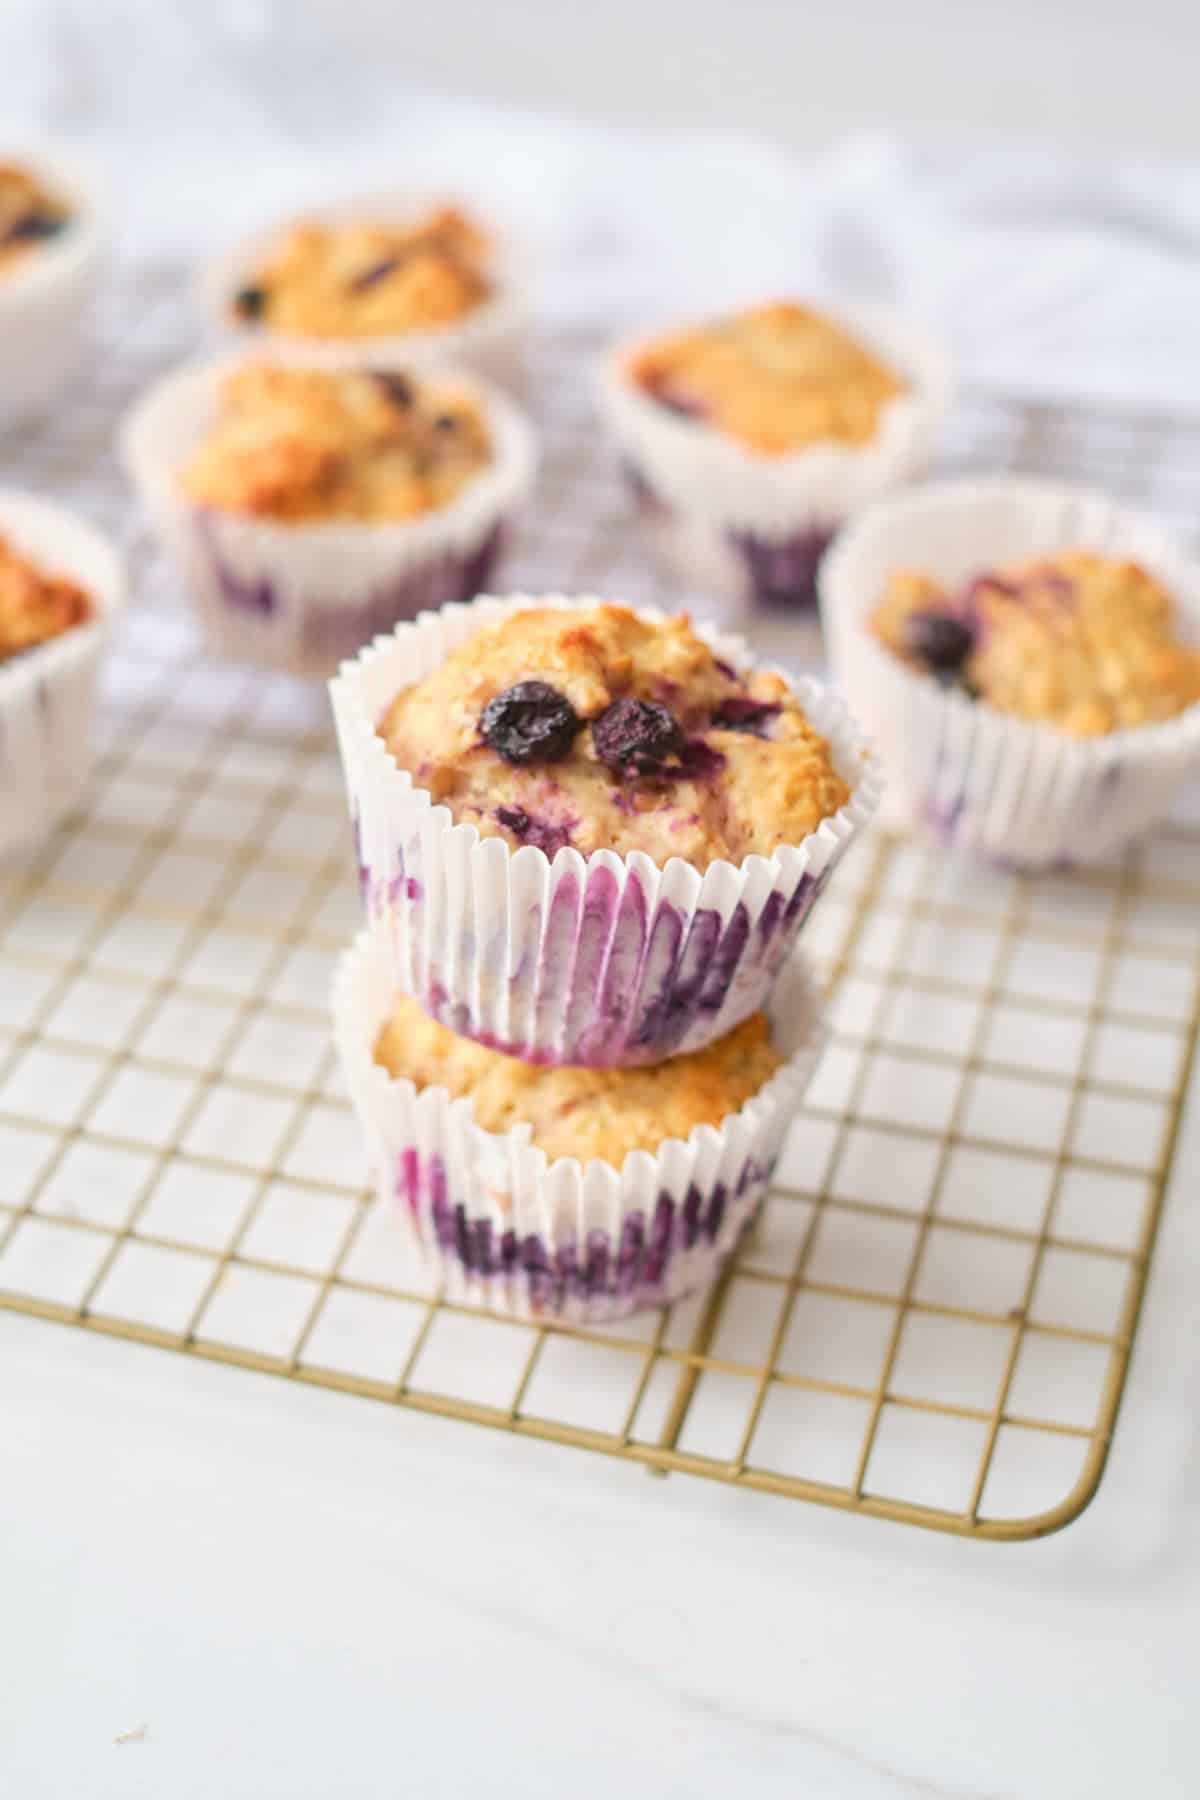 Blueberry oatmeal muffins healthy blueberry desserts